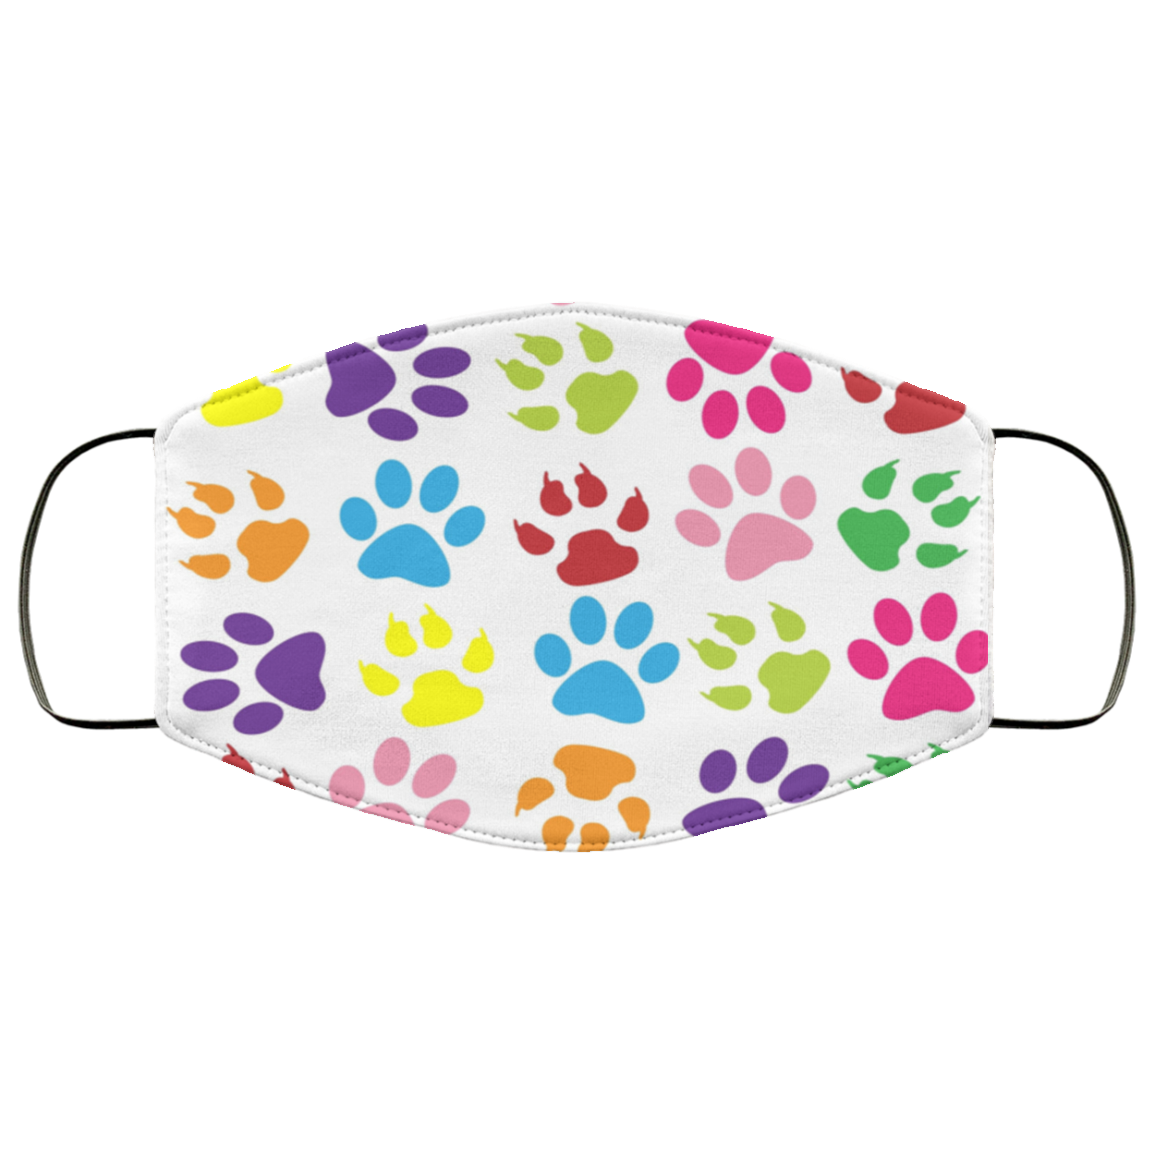 Dog 7 2 Layer Protective Face Mask